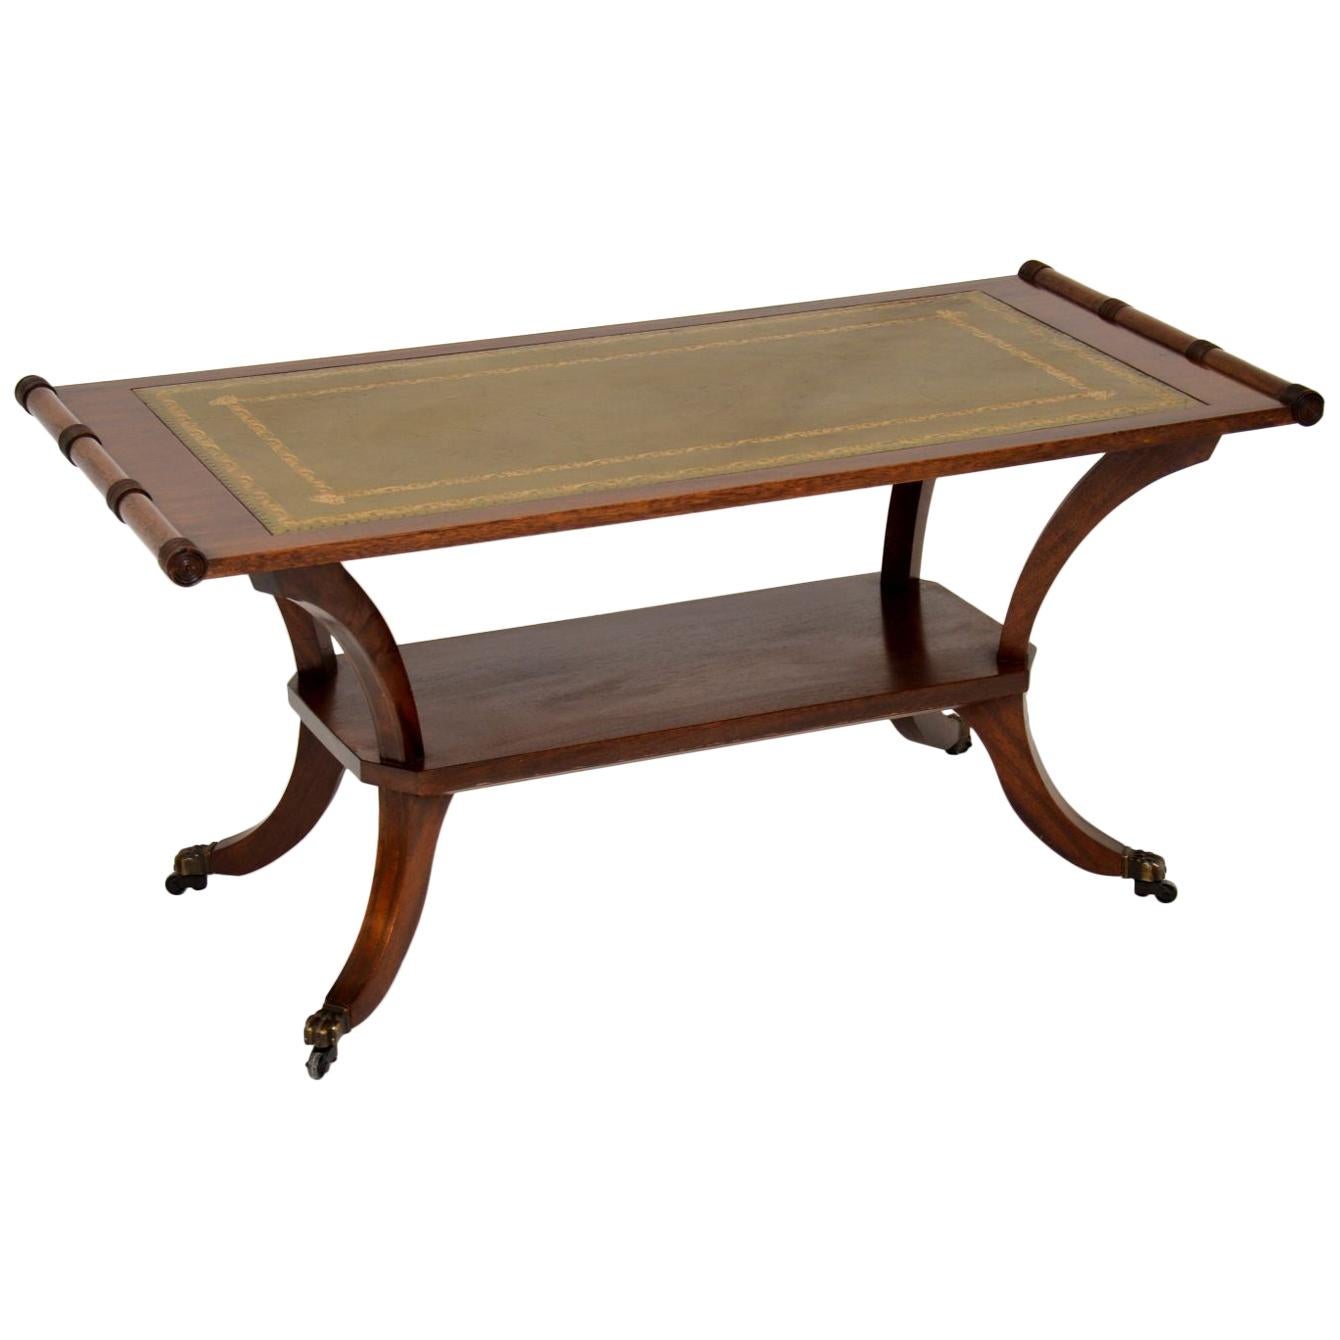 Antique Regency Style Mahogany Leather Top Coffee Table